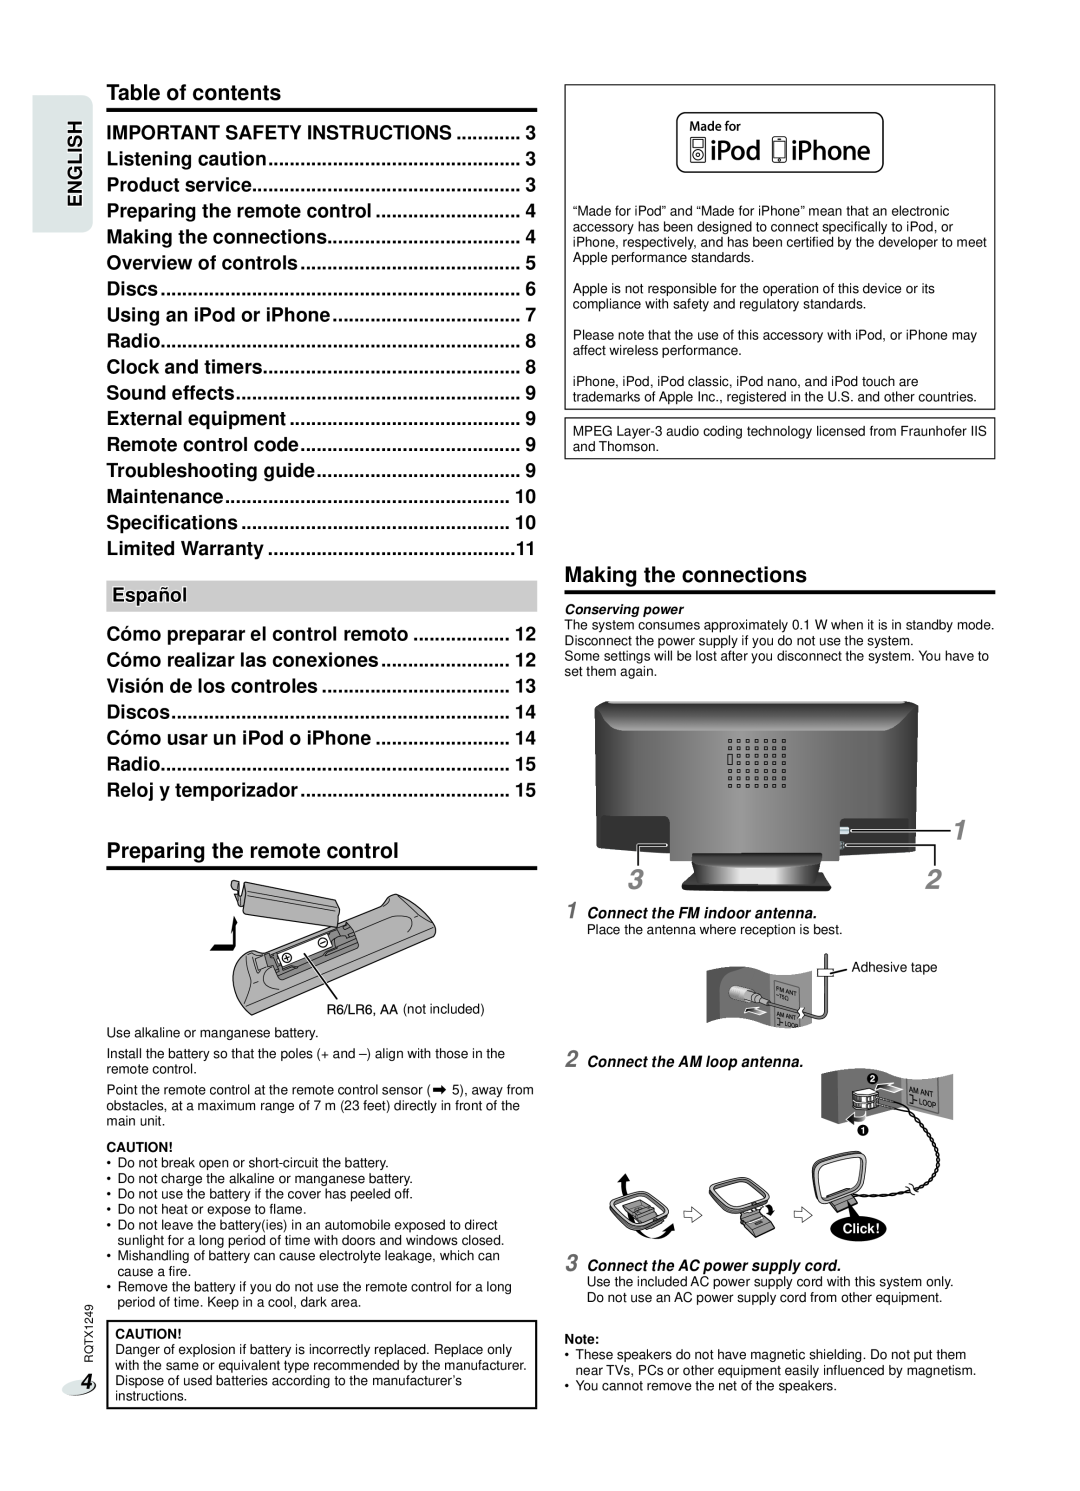 Panasonic SC-HC25 Table of contents, Making the connections, Preparing the remote control, Important Safety Instructions 